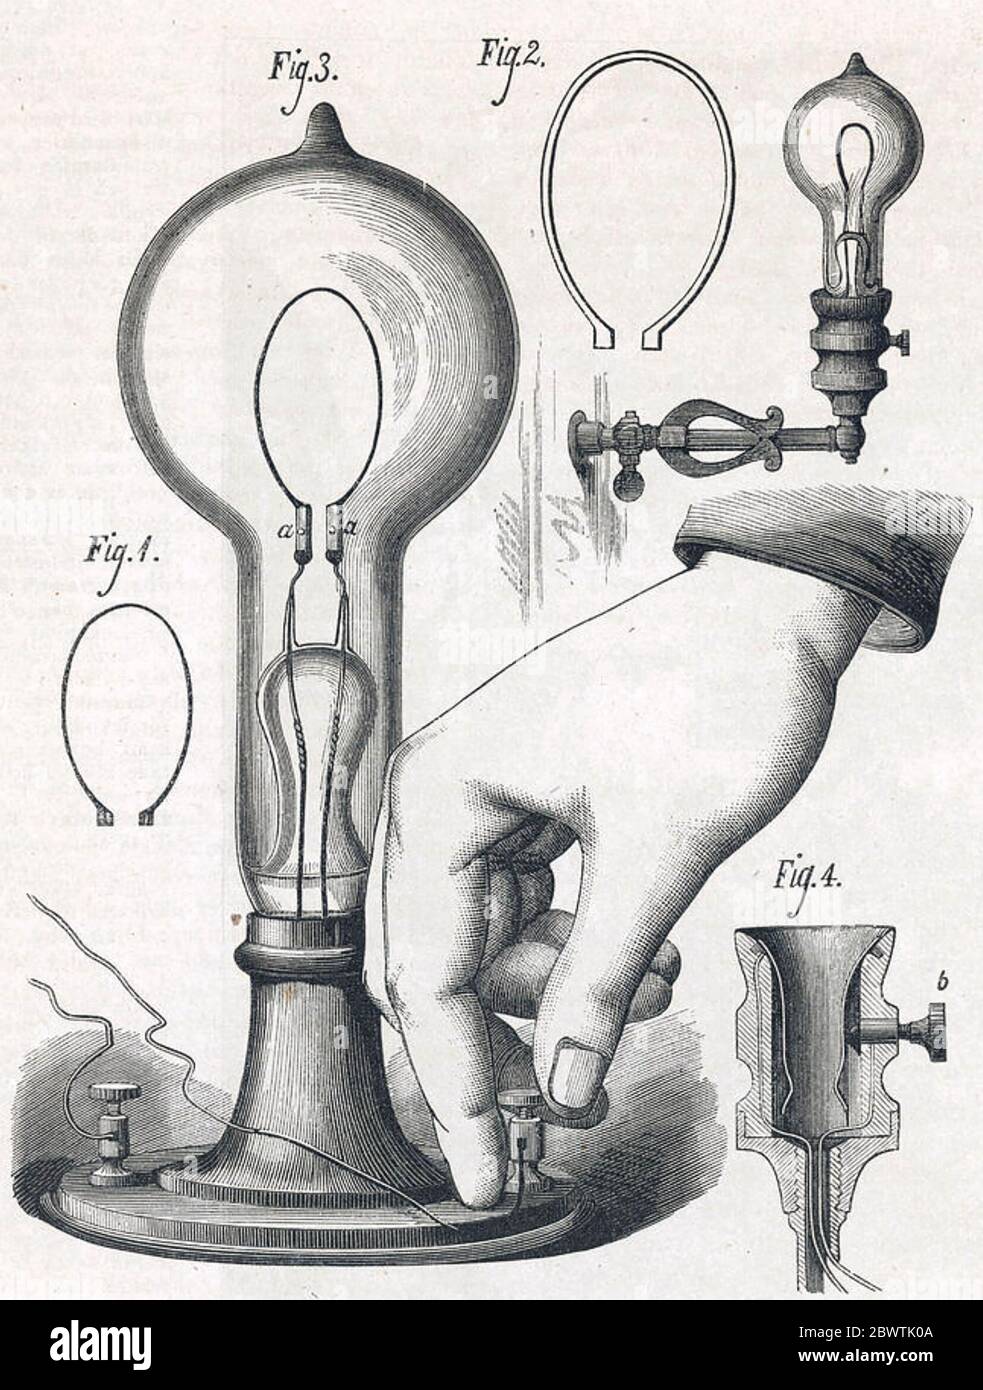 THOMAS EDISON (1847-1931) American inventor. An 1880 diagram of his electric lamp Stock Photo